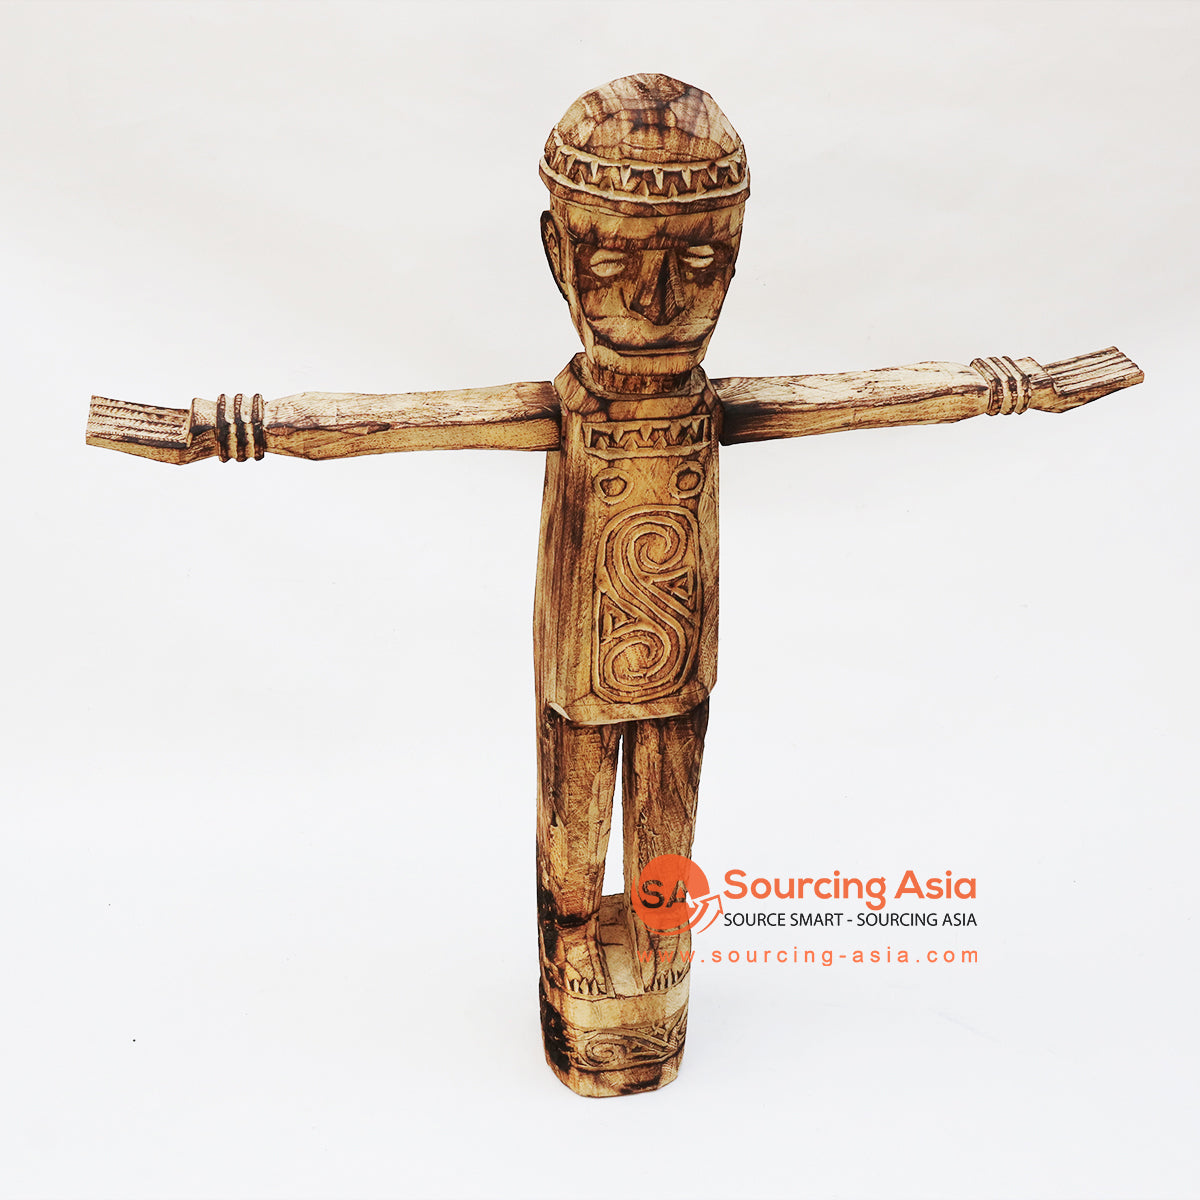 EXAC015-1 BROWN WASH WOODEN SUMBA FIGURE ON STAND DECORATION